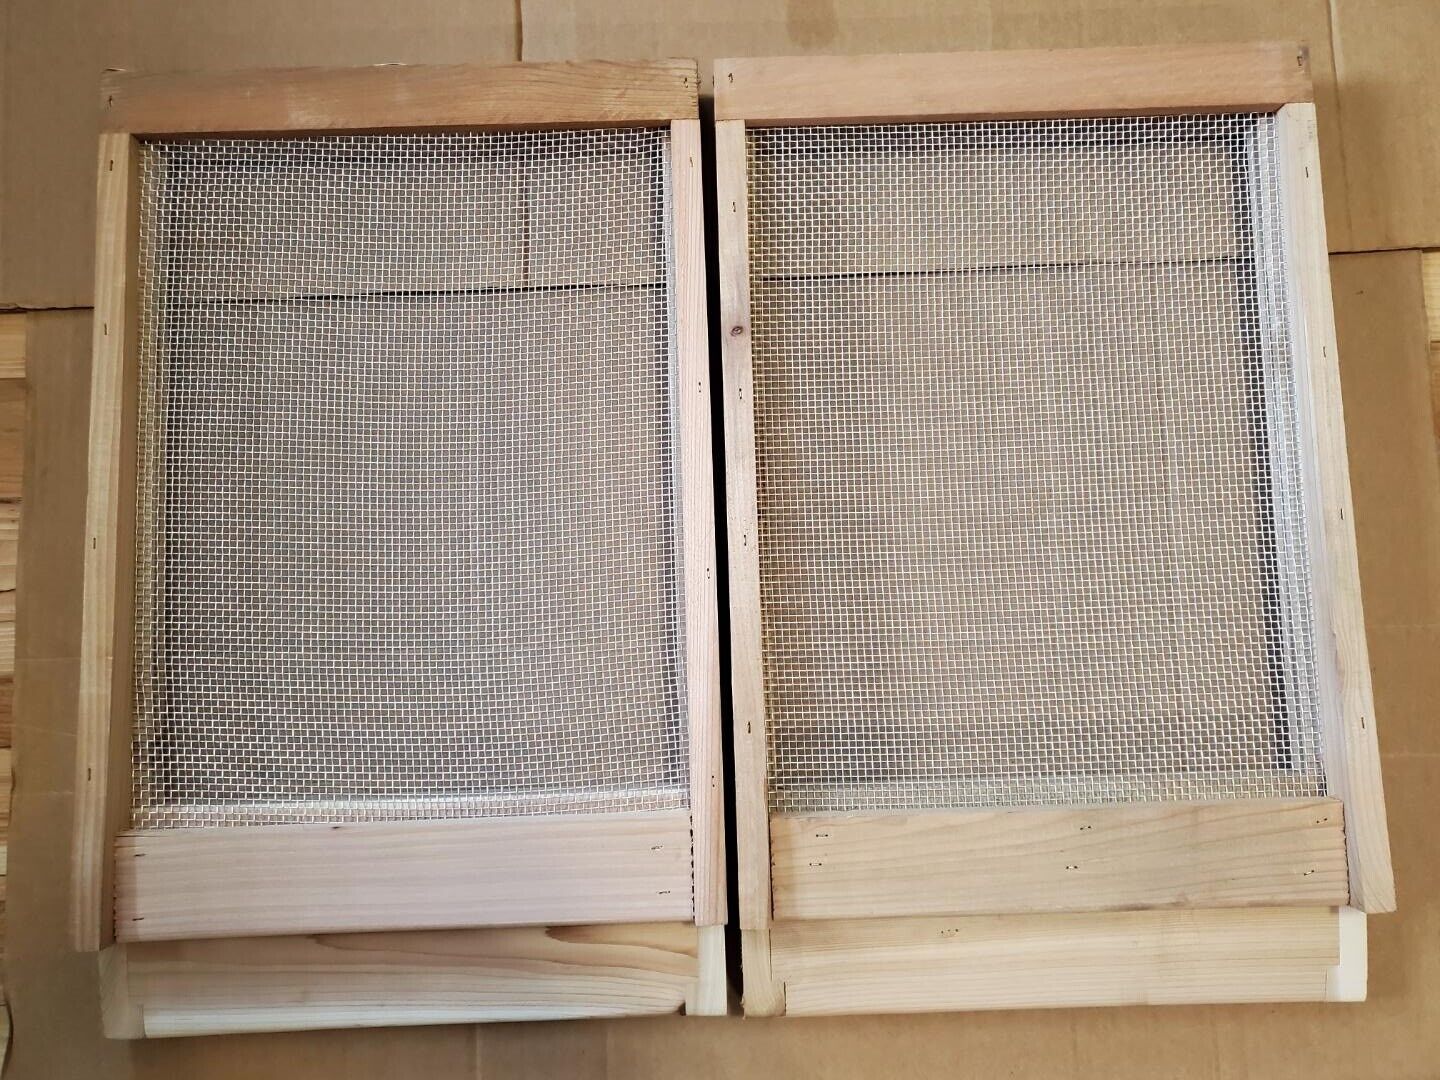 Cedar 8 Frame  Bee Hive Screened Bottom Boards For Langstroth Beehive (lot of 2) Beehive